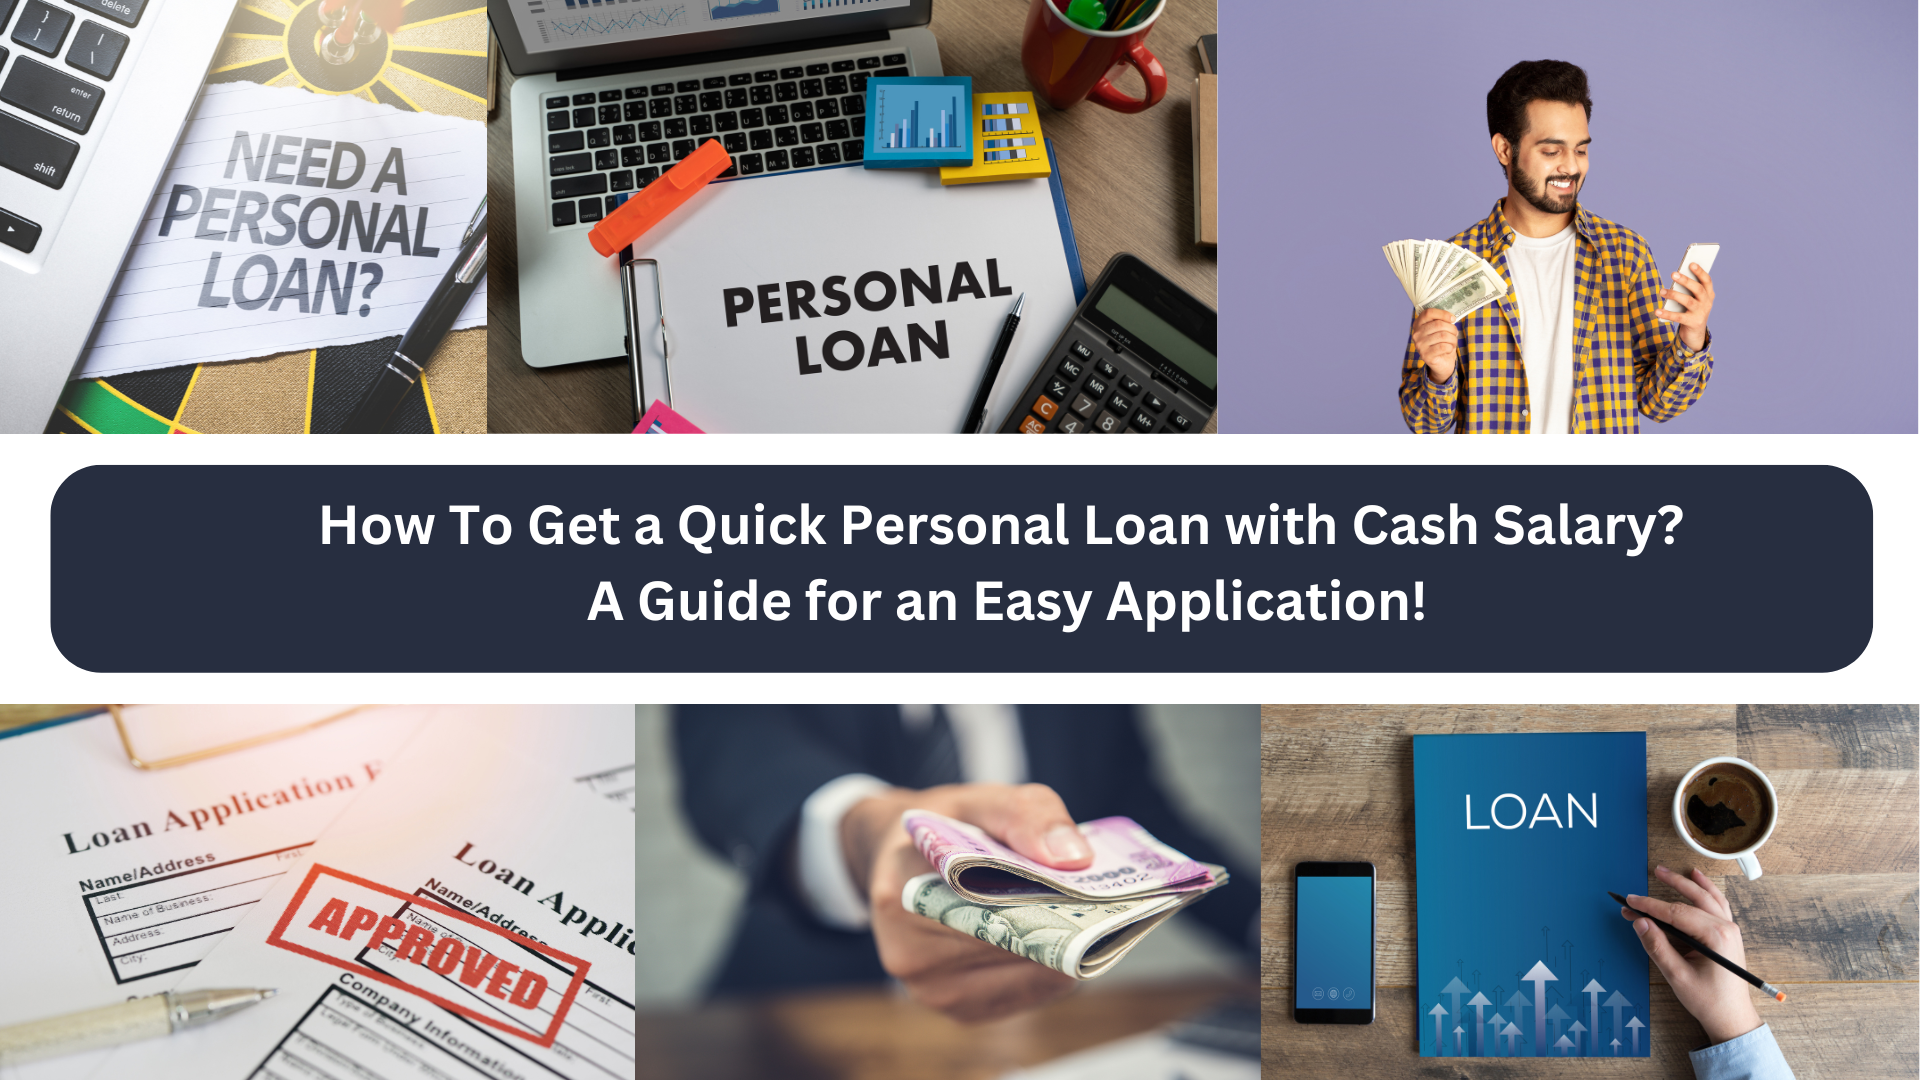 How To Get a Quick Personal Loan with Cash Salary? A Guide for an Easy Application!